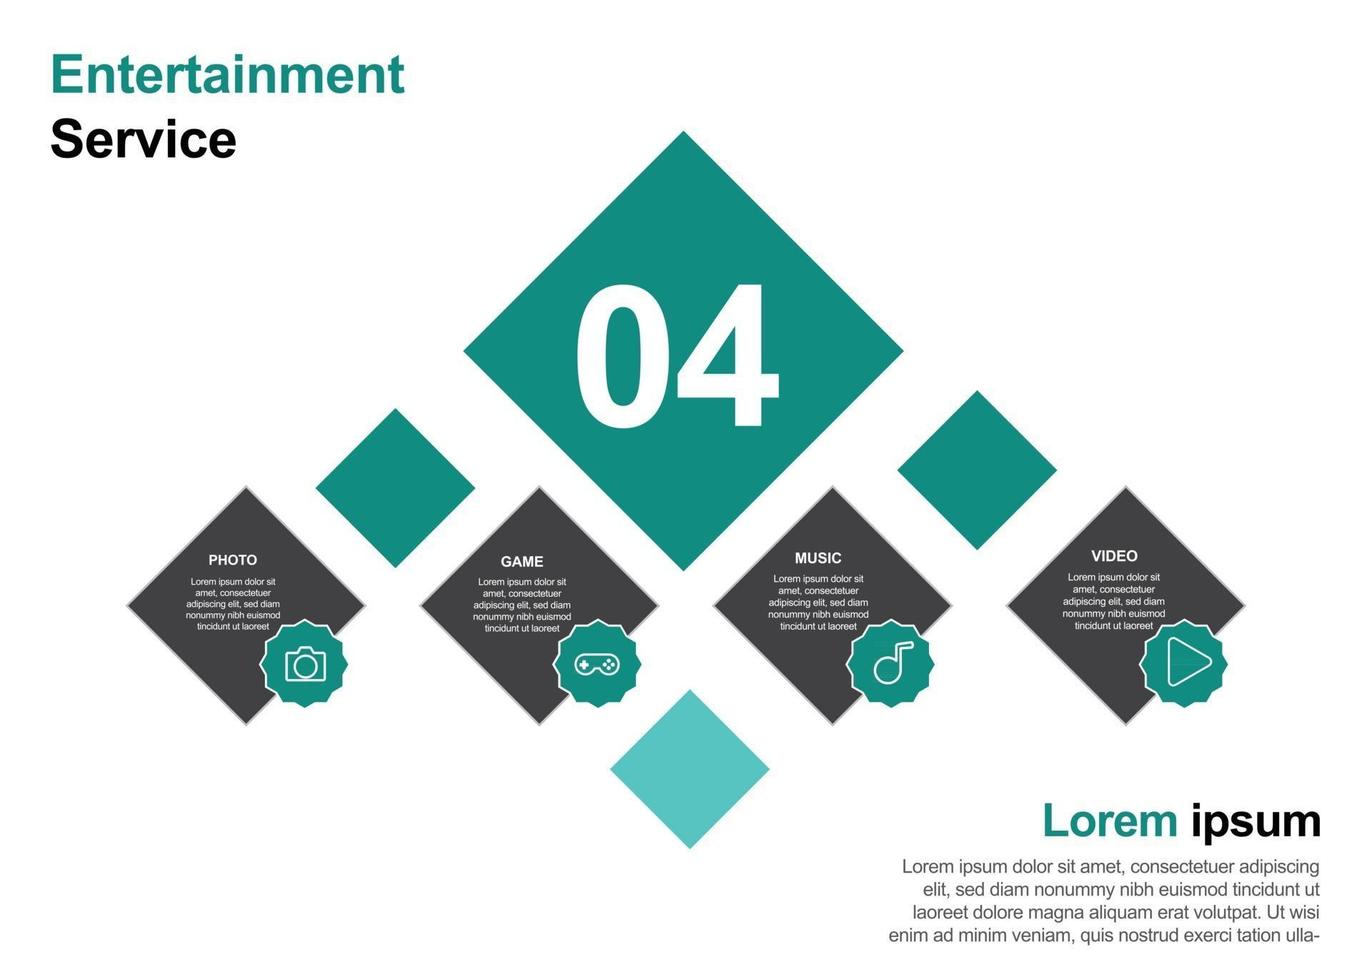 entertainment service design template perfect for brochures, marketing promotion, infographics etc vector